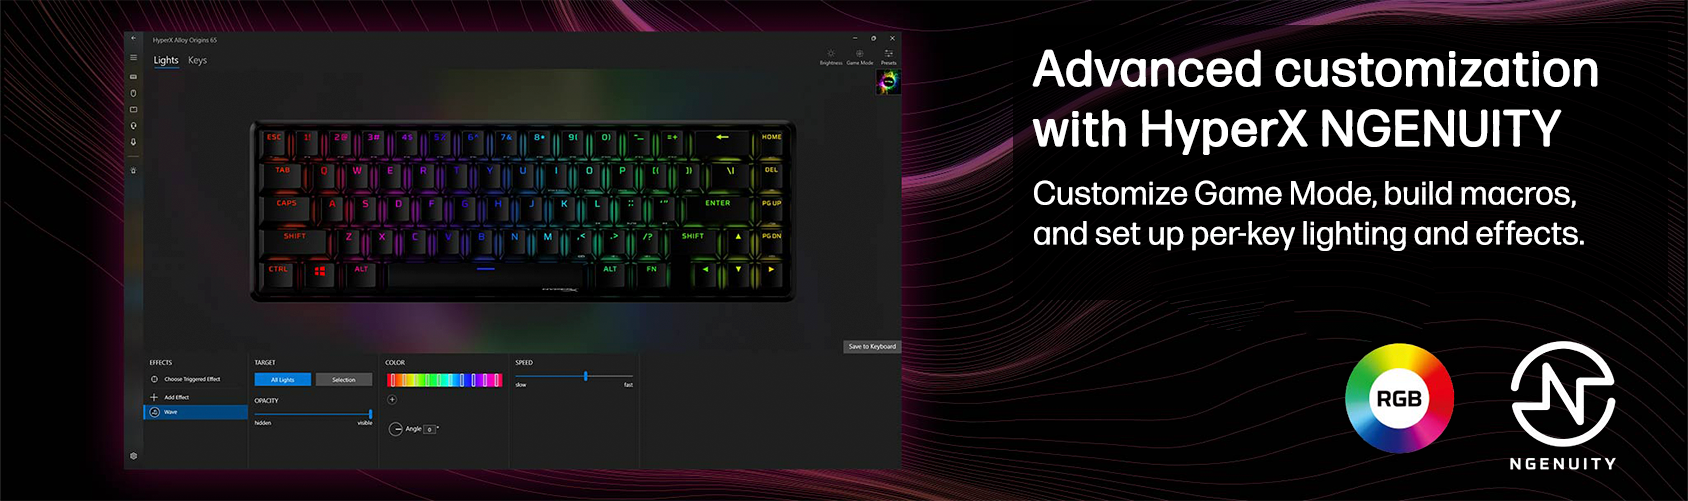 Advanced customization with HyperX NGENUITY